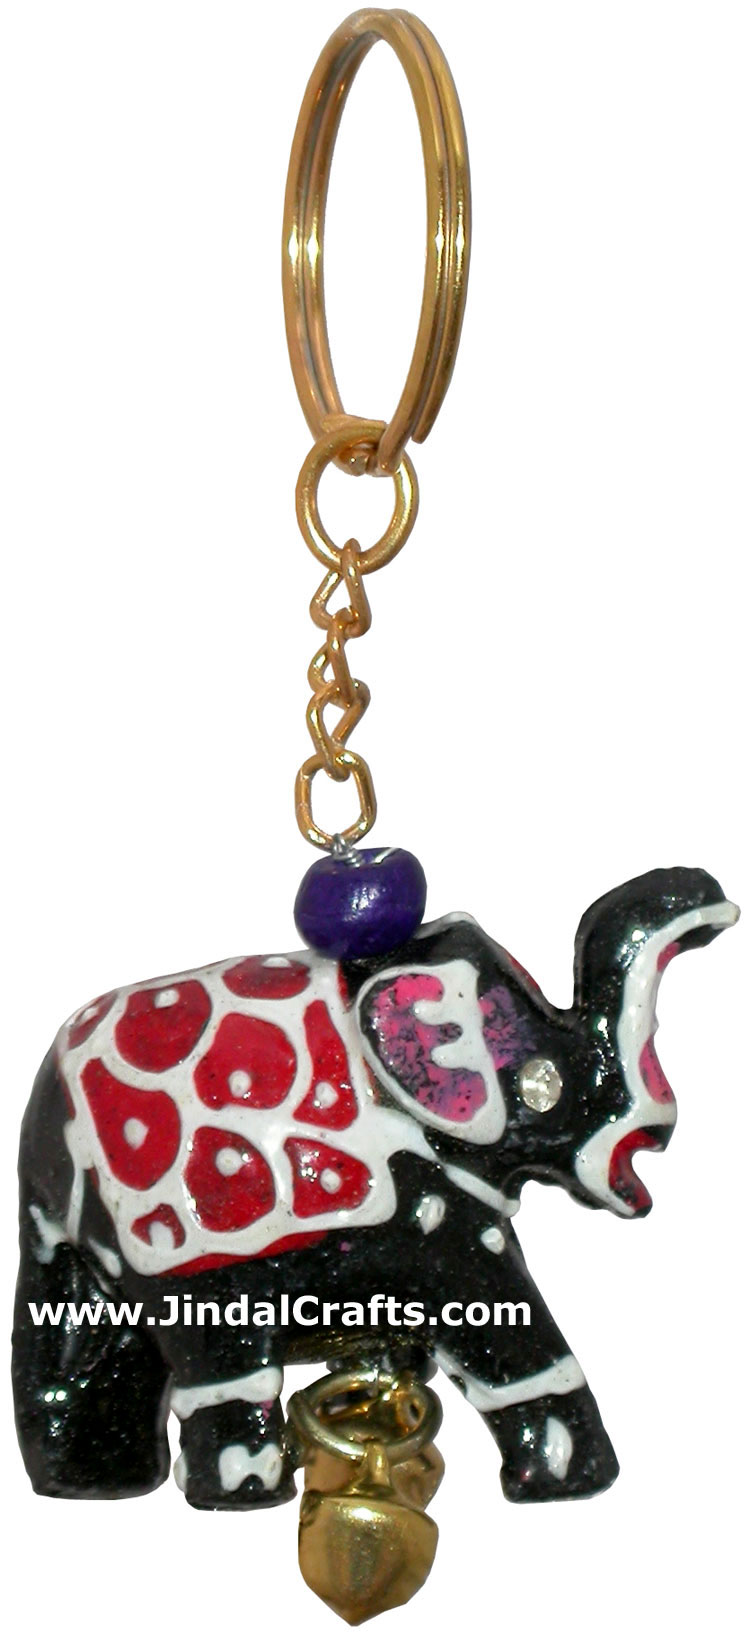 Elephant - Hand Carved PVC Key Chain Ring India Art